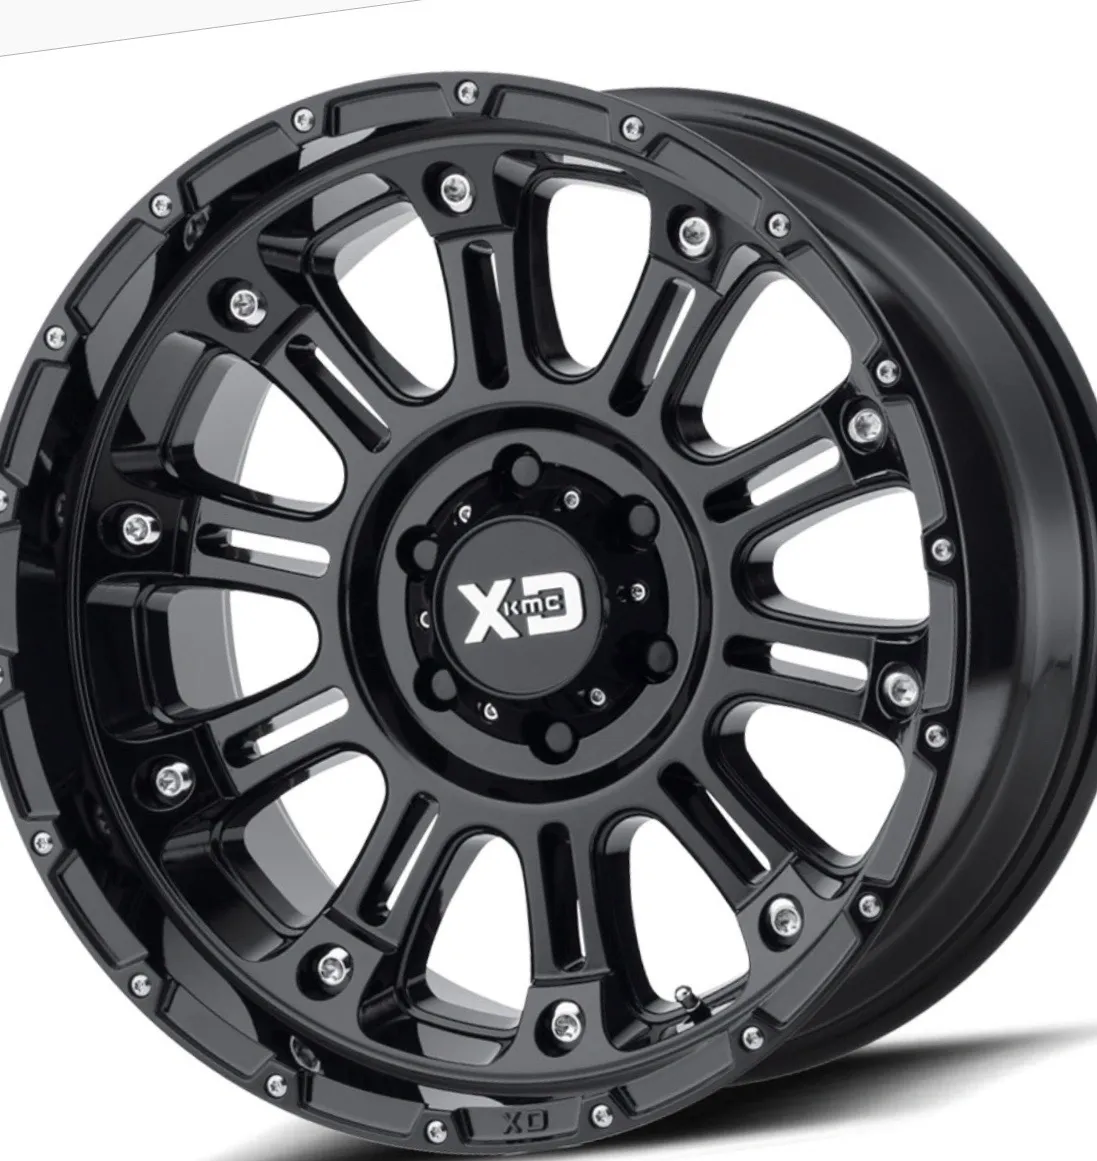 A black wheel with a black rim and black accents.